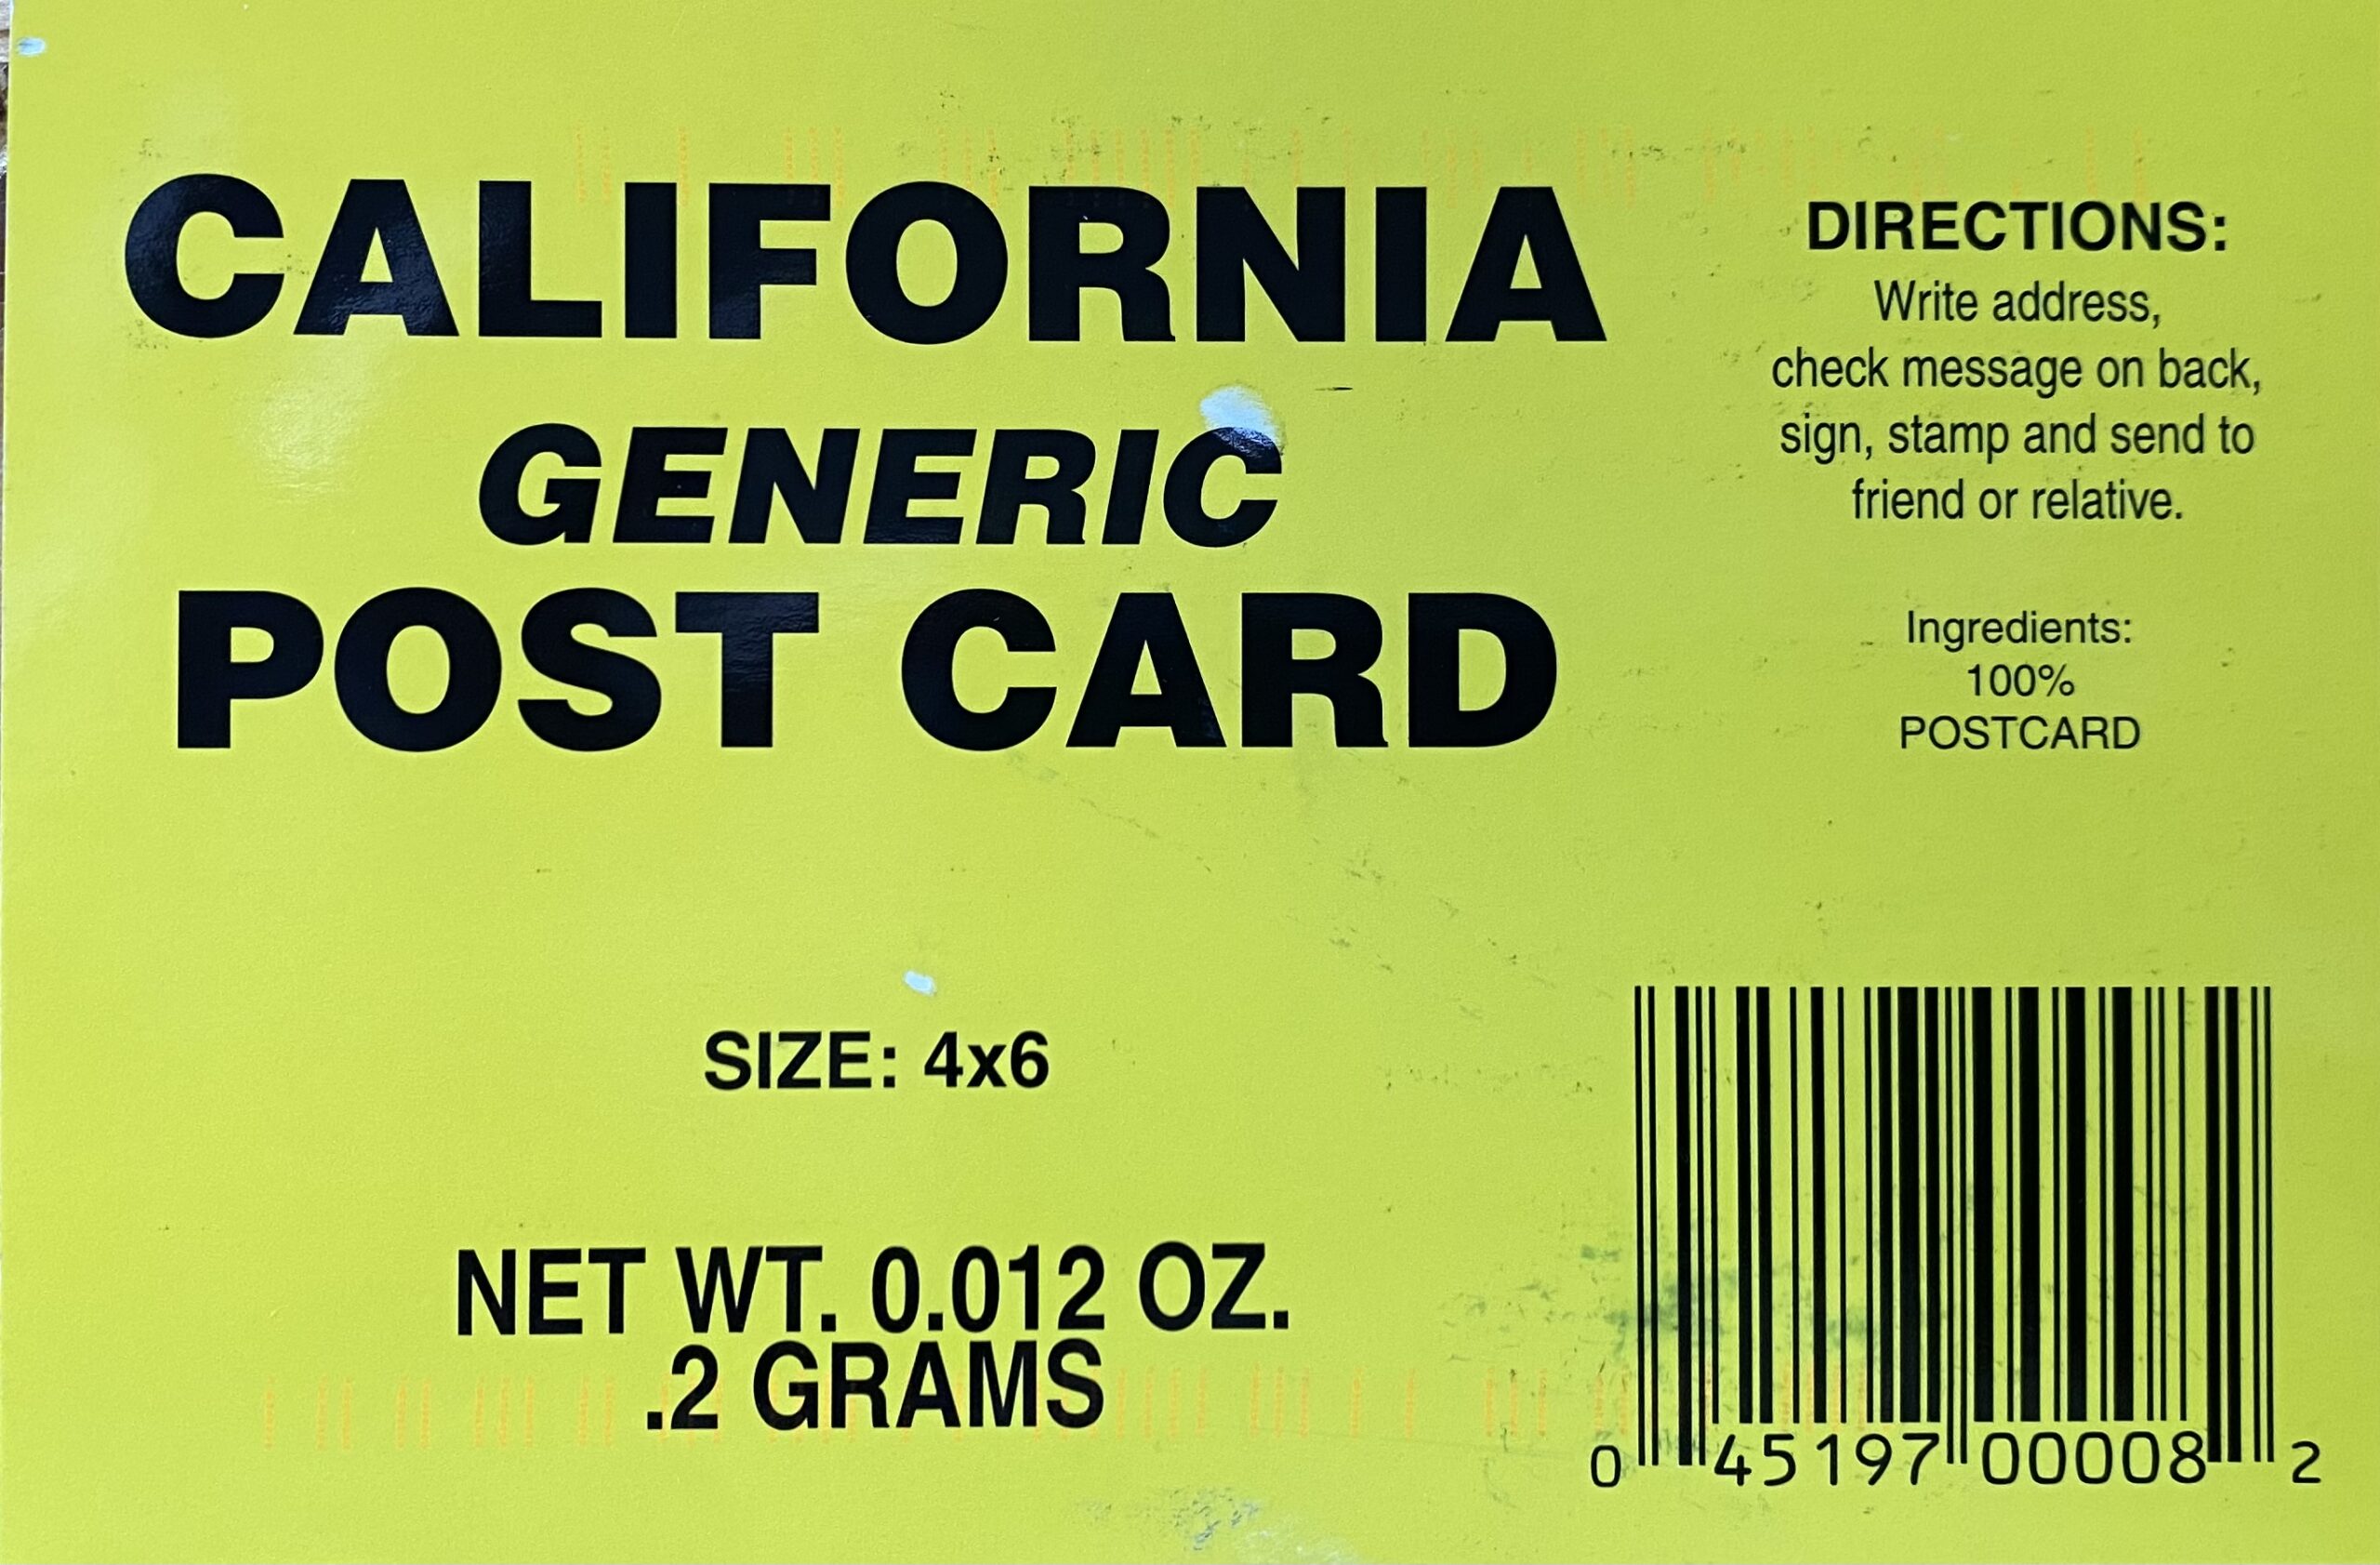 Postcard from California, received August 10 2022